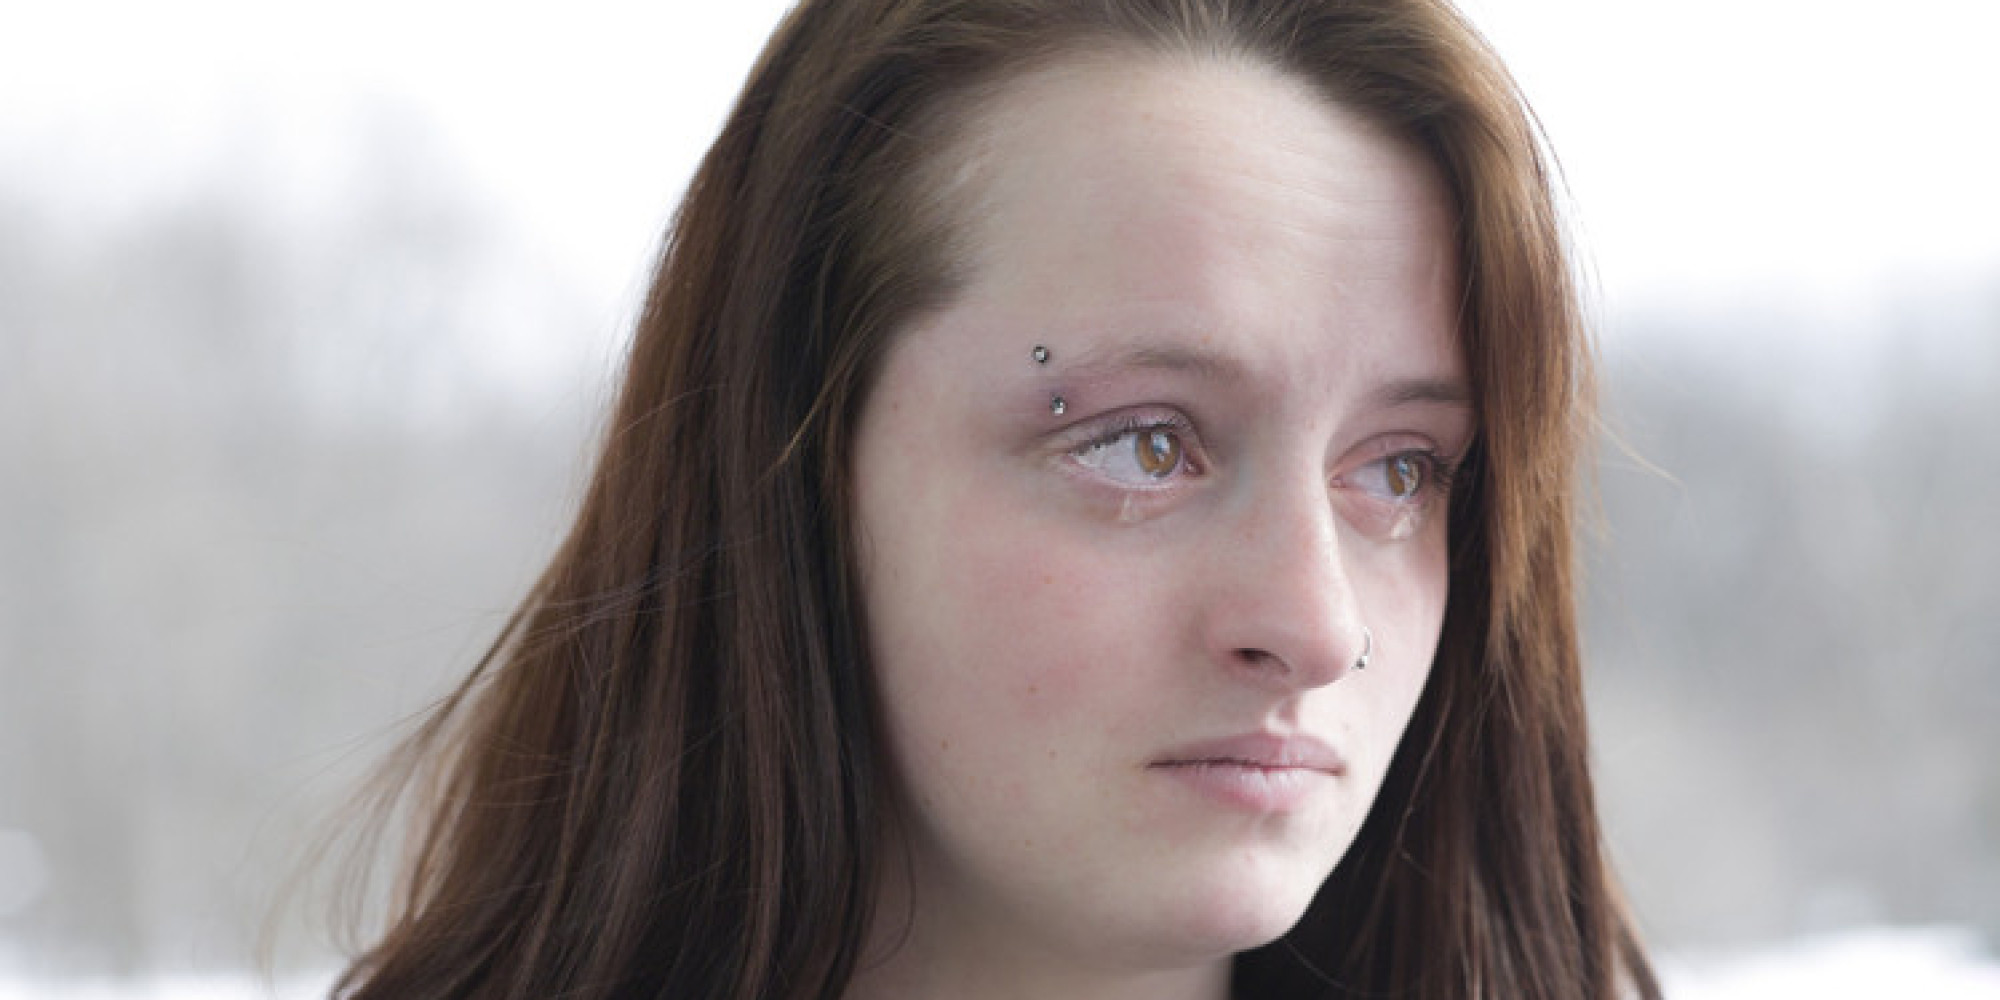 Heartbreaking Photos Of Sexual Assault Survivors Aim To Open Our Eyes